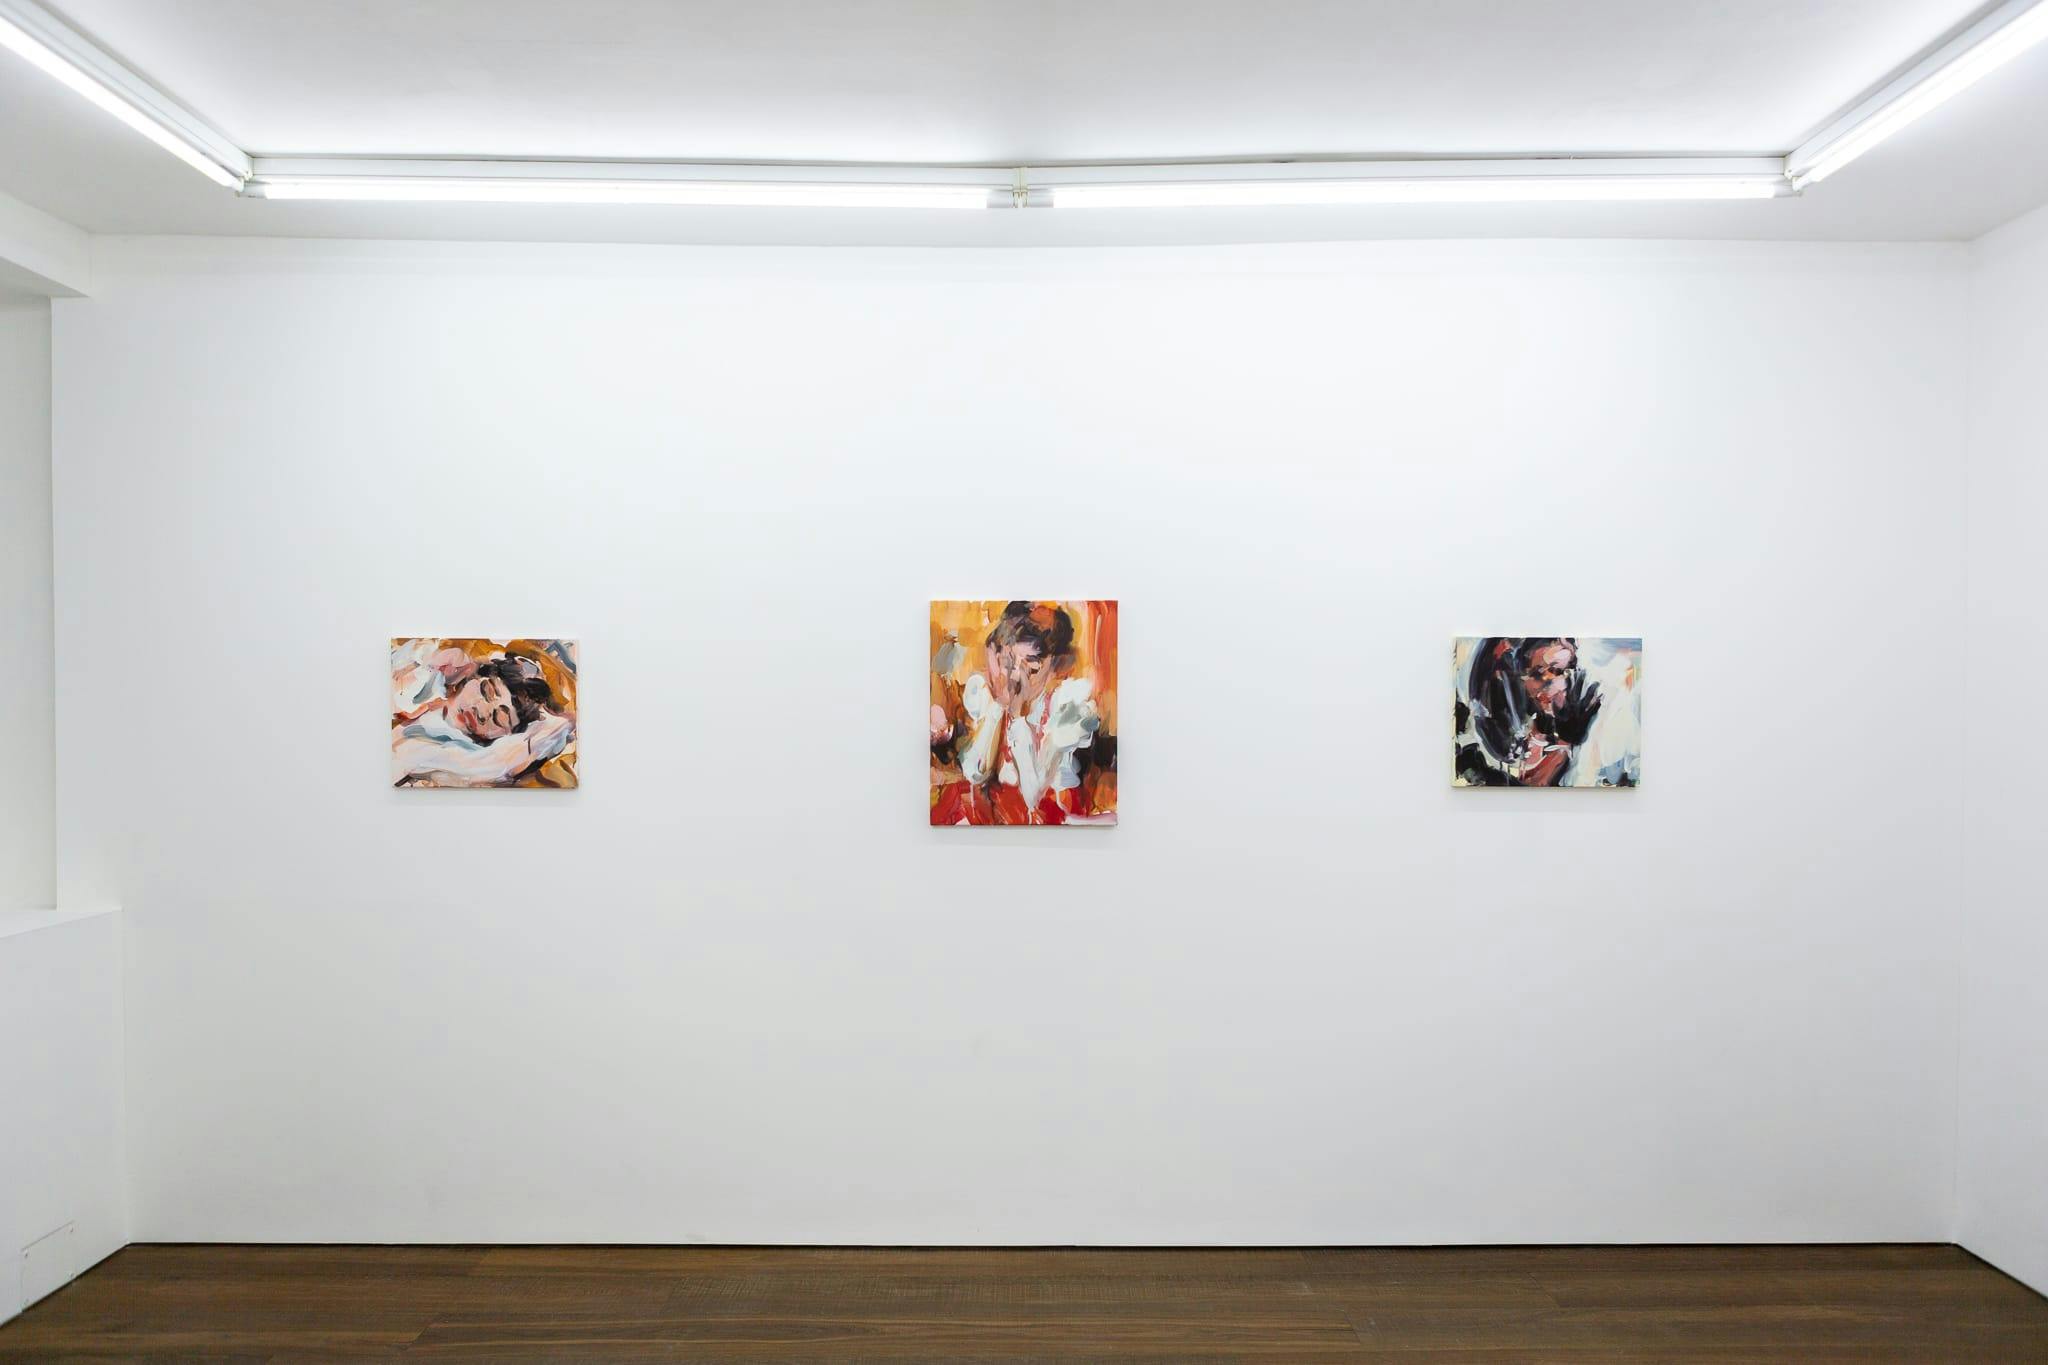 Installation shots of Laura Lancaster's solo show at Workplace London. Close up crop paintings of sleeping women and figures in landscapes, loosely painted.